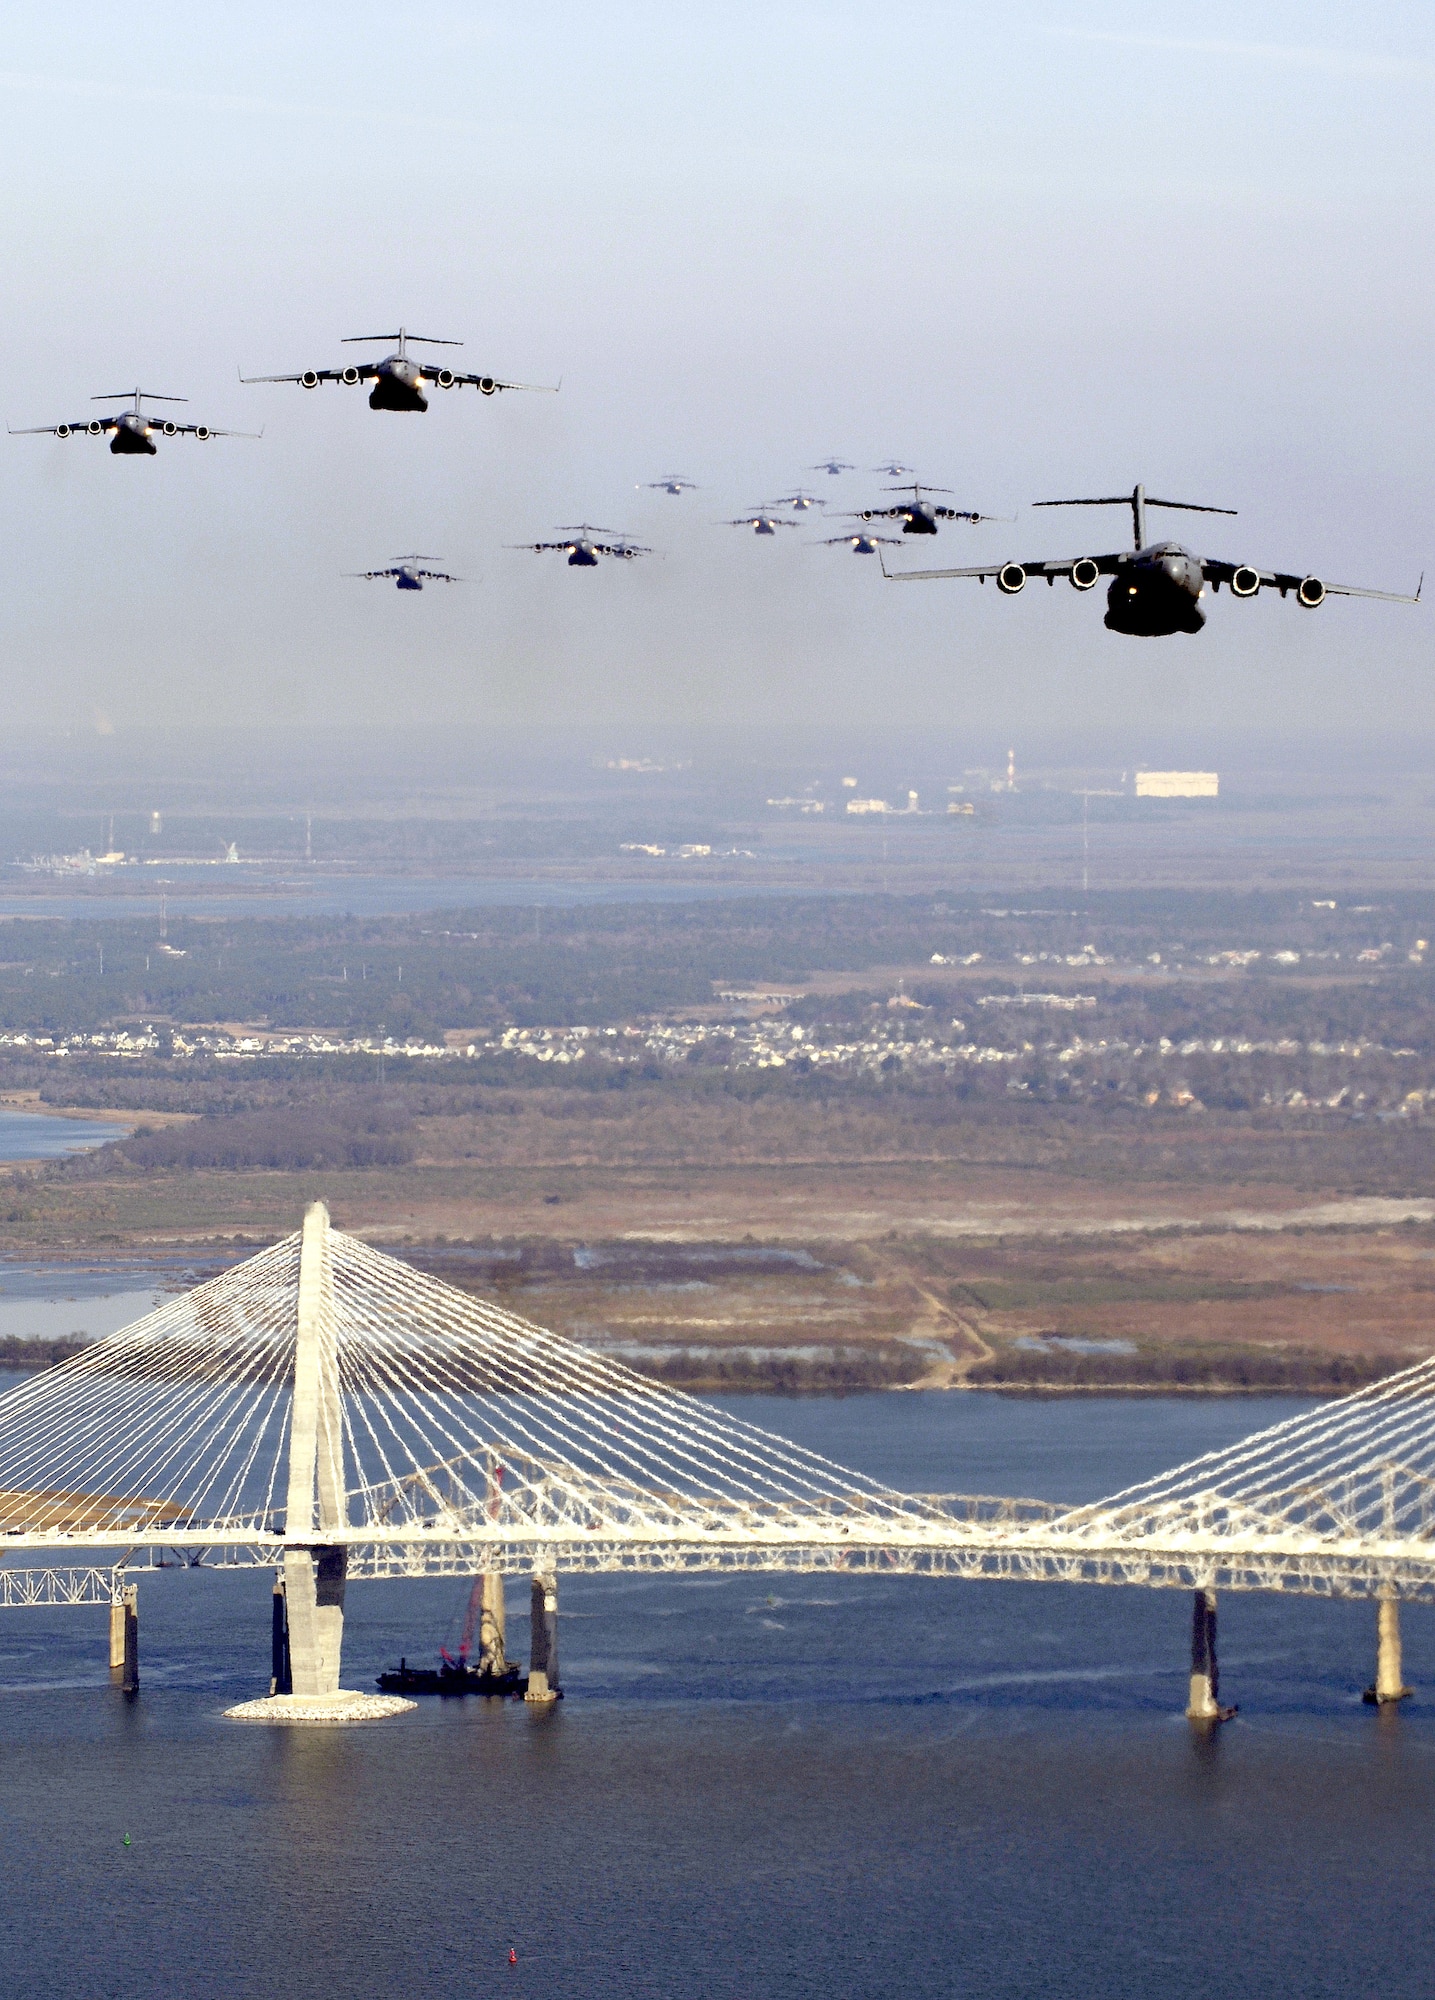 CHARLESTON, S.C. (AFPN) -- formation of 17 C-17 Globemaster IIIs fly over the Arthur Ravenel Bridge. The C-17s, assigned to the 437th and 315th Airlift Wings here, were part of the largest formation in history from a single base and demonstrated the strategic airdrop capability of the Air Force. (U.S. Air Force photo by Staff Sgt. Jacob Bailey)